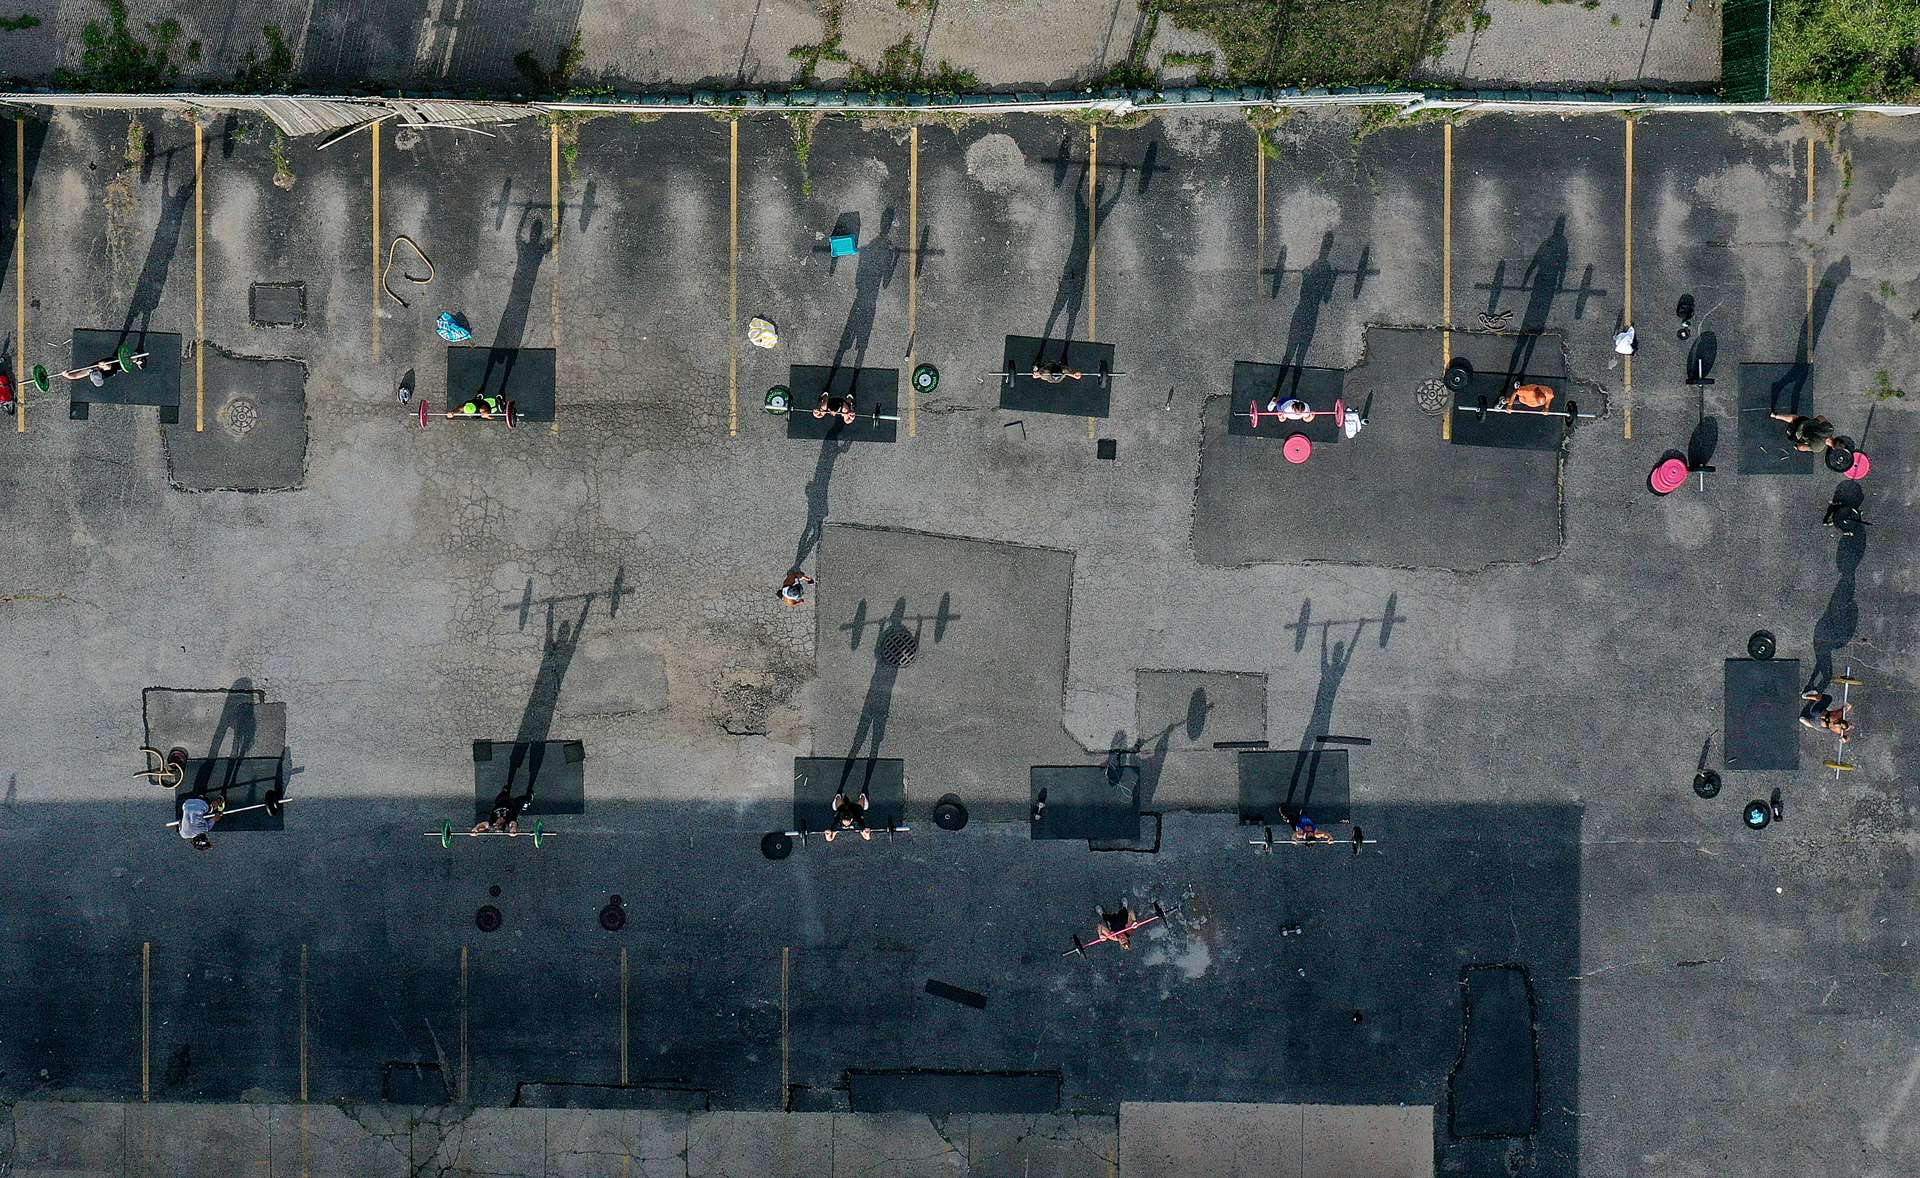 An aerial view of Fitness Instructor Dennis Guerrero leading an outdoor Jetty Gym {quote}Outside The Box{quote} fitness workout on July 20, 2020 in Oceanside, New York.  New York Governor Andrew Cuomo announced that gyms will not be permitted to reopen during phase 4 until New York's Health Department determines if air filtering systems are circulating the coronavirus. More than 3,900,000 people in the United States alone have been infected with the coronavirus and at least 143,000 have died.  